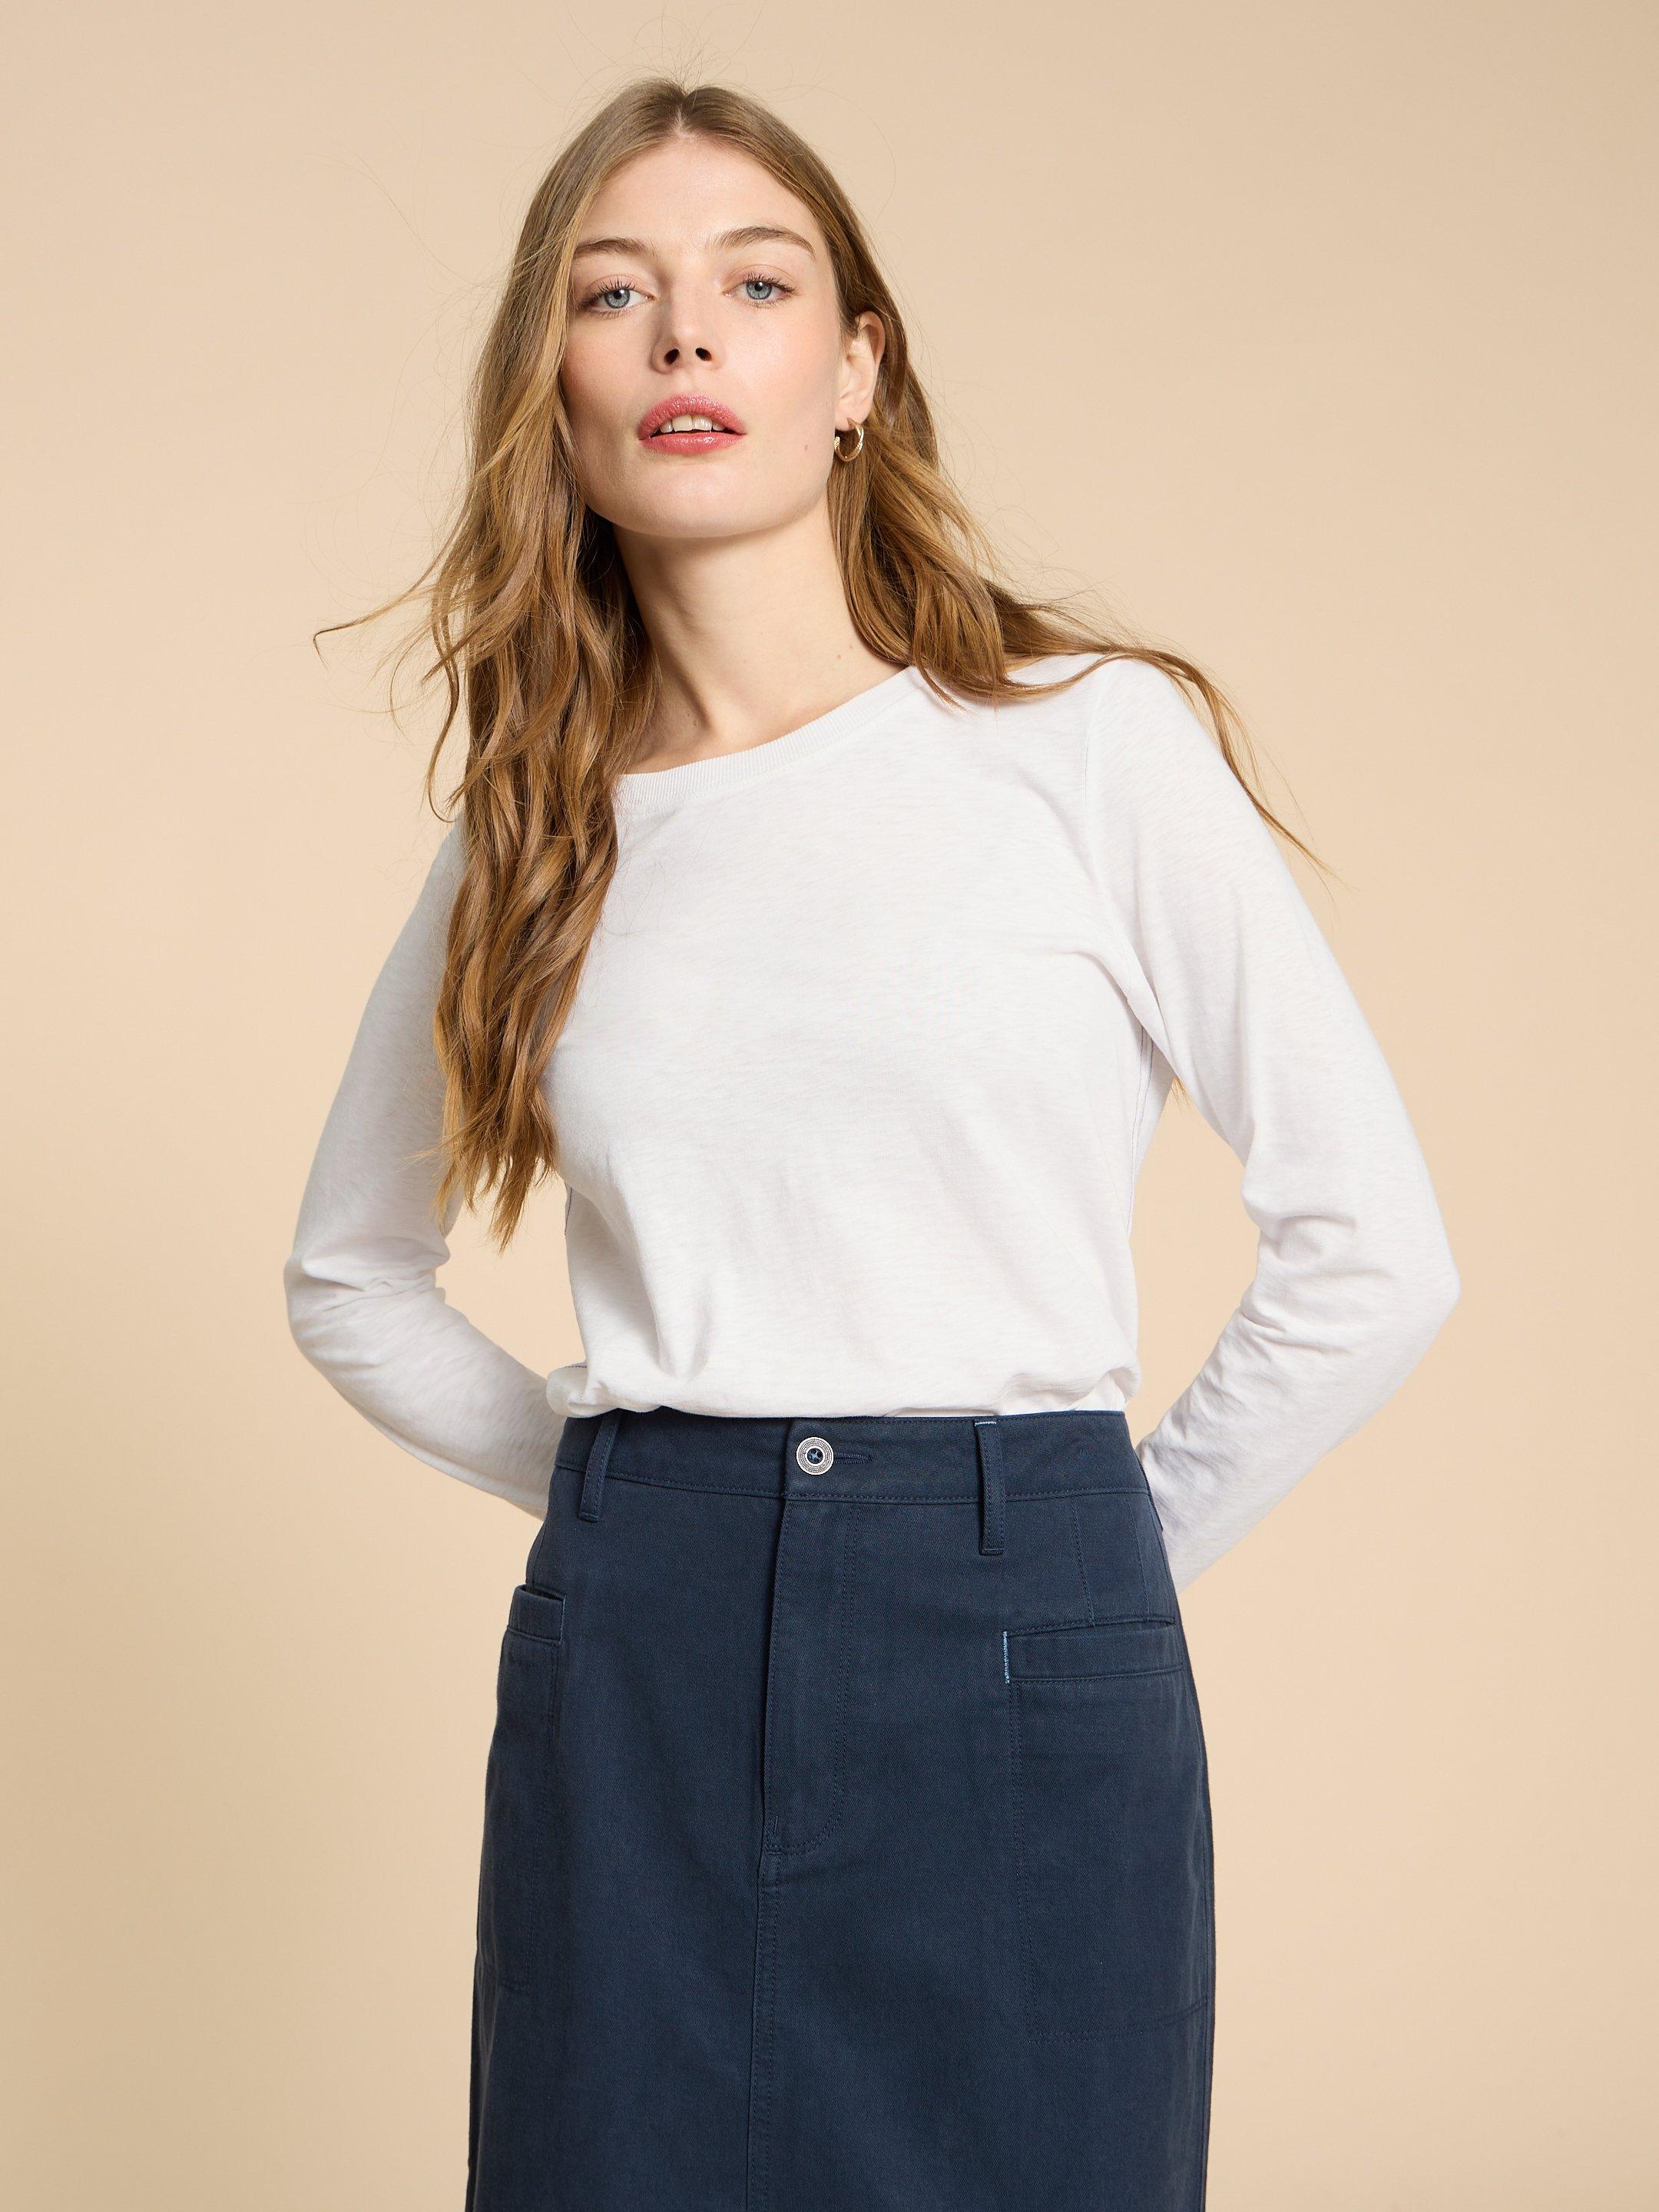 CLARA LS TEE in BRIL WHITE - MODEL FRONT